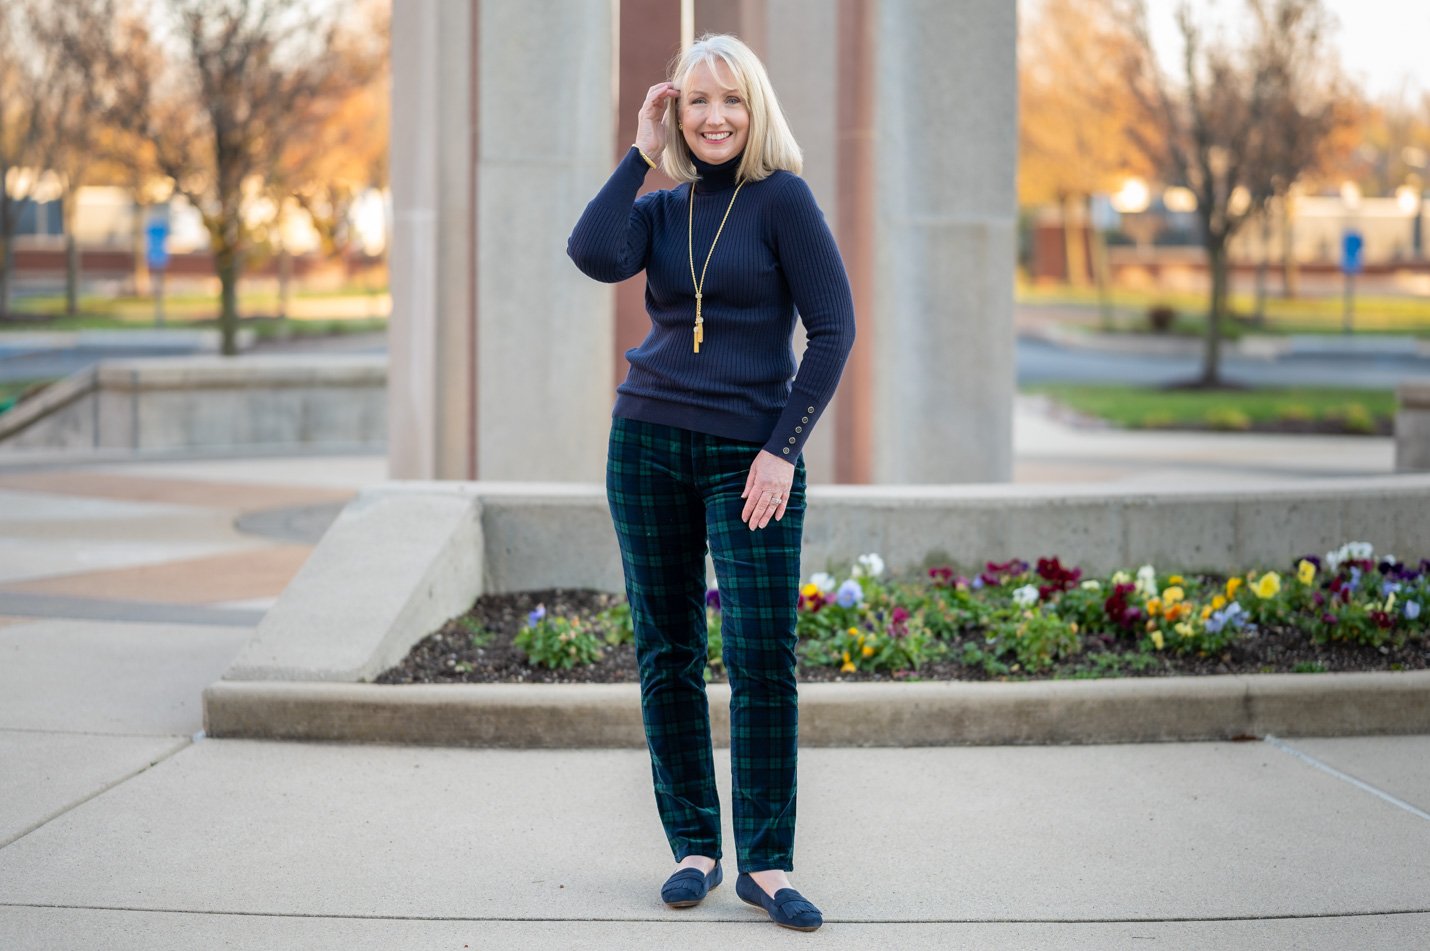 Tartan Plaid Holiday Look for Women Over 50